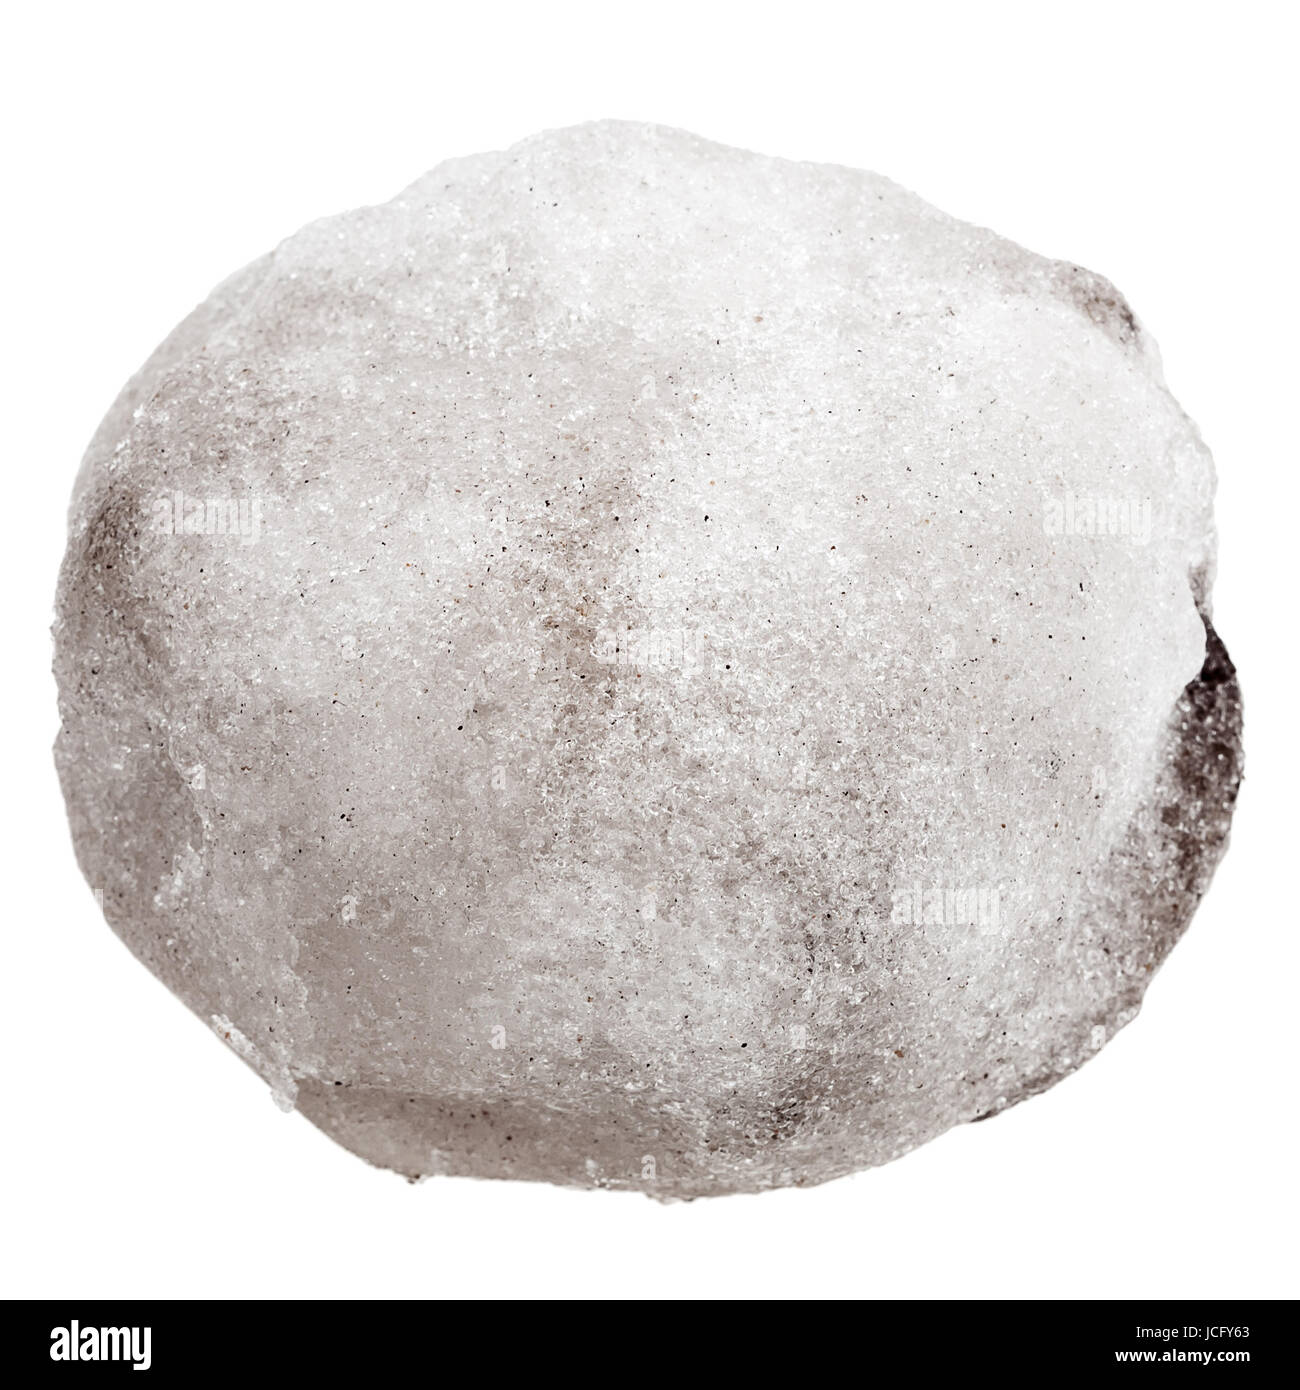 Dirty snowball or hailstone isolated on a white background Stock Photo